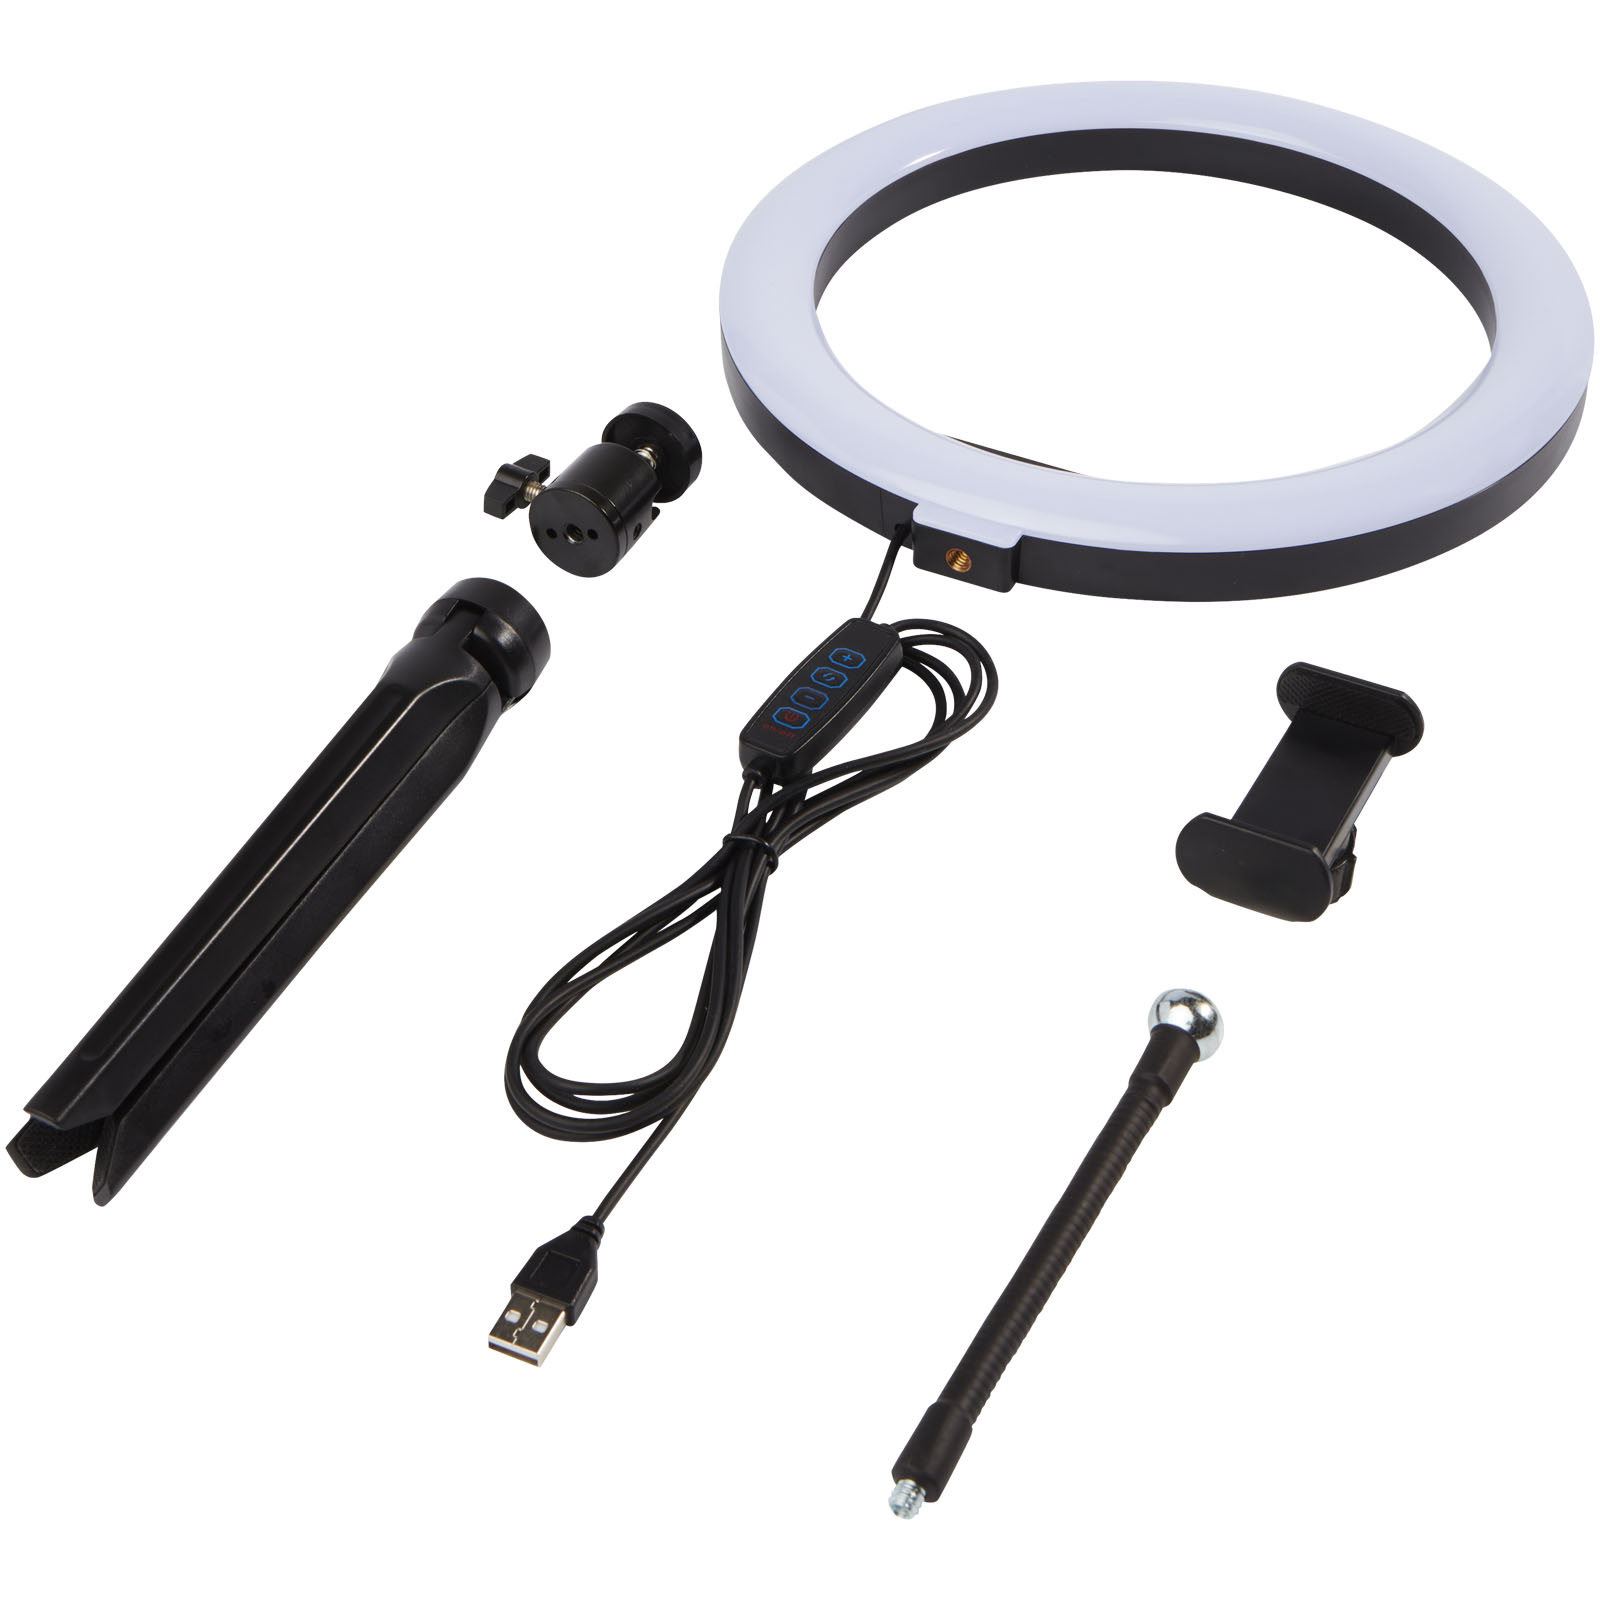 Advertising Telephone & Tablet Accessories - Studio ring light for selfies and vlogging with phone holder and tripod - 5